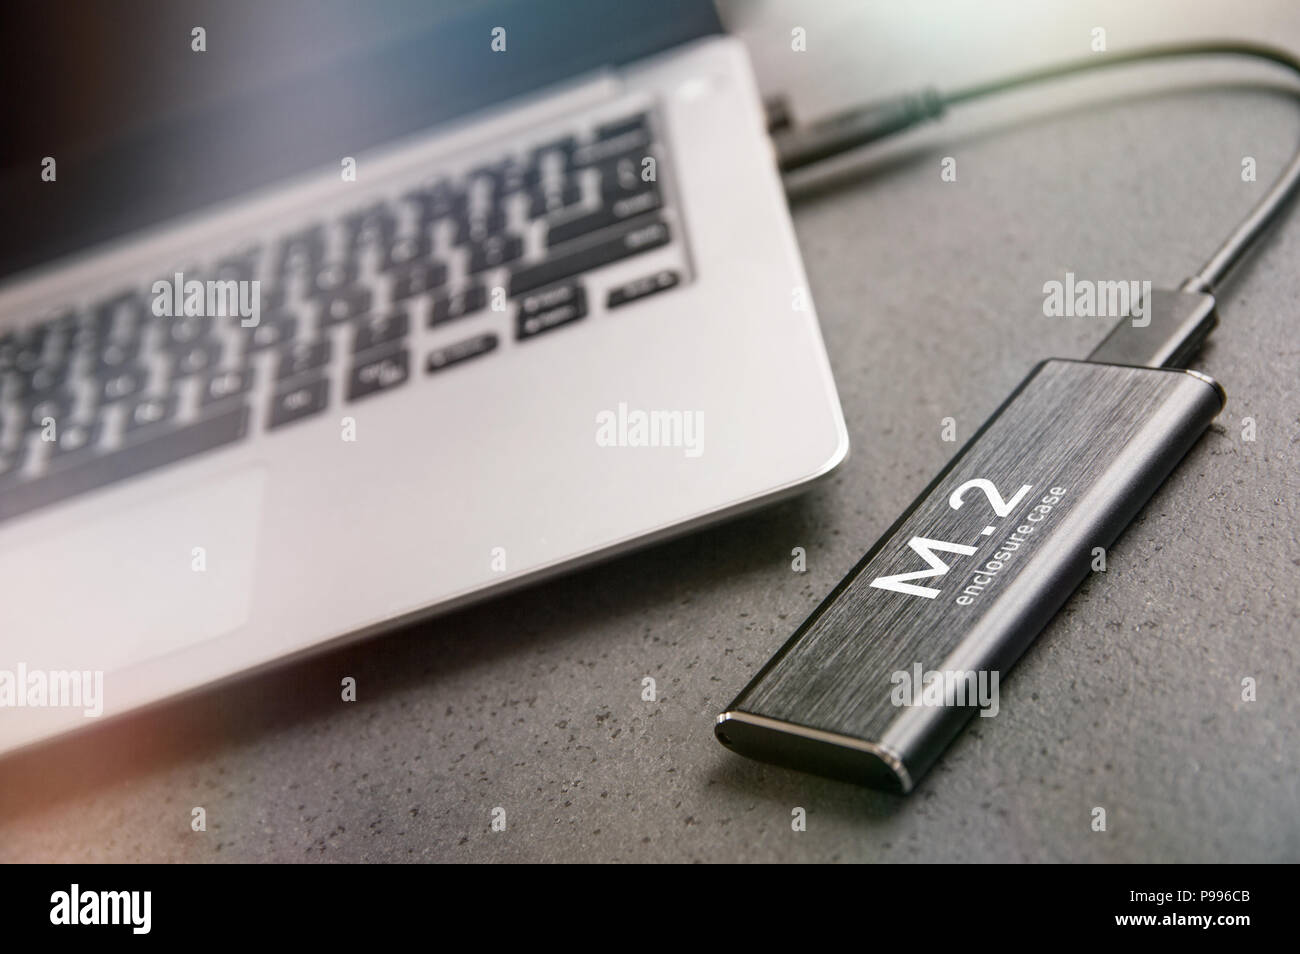 Ssd m 2 Cut Out Stock Images & Pictures - Alamy